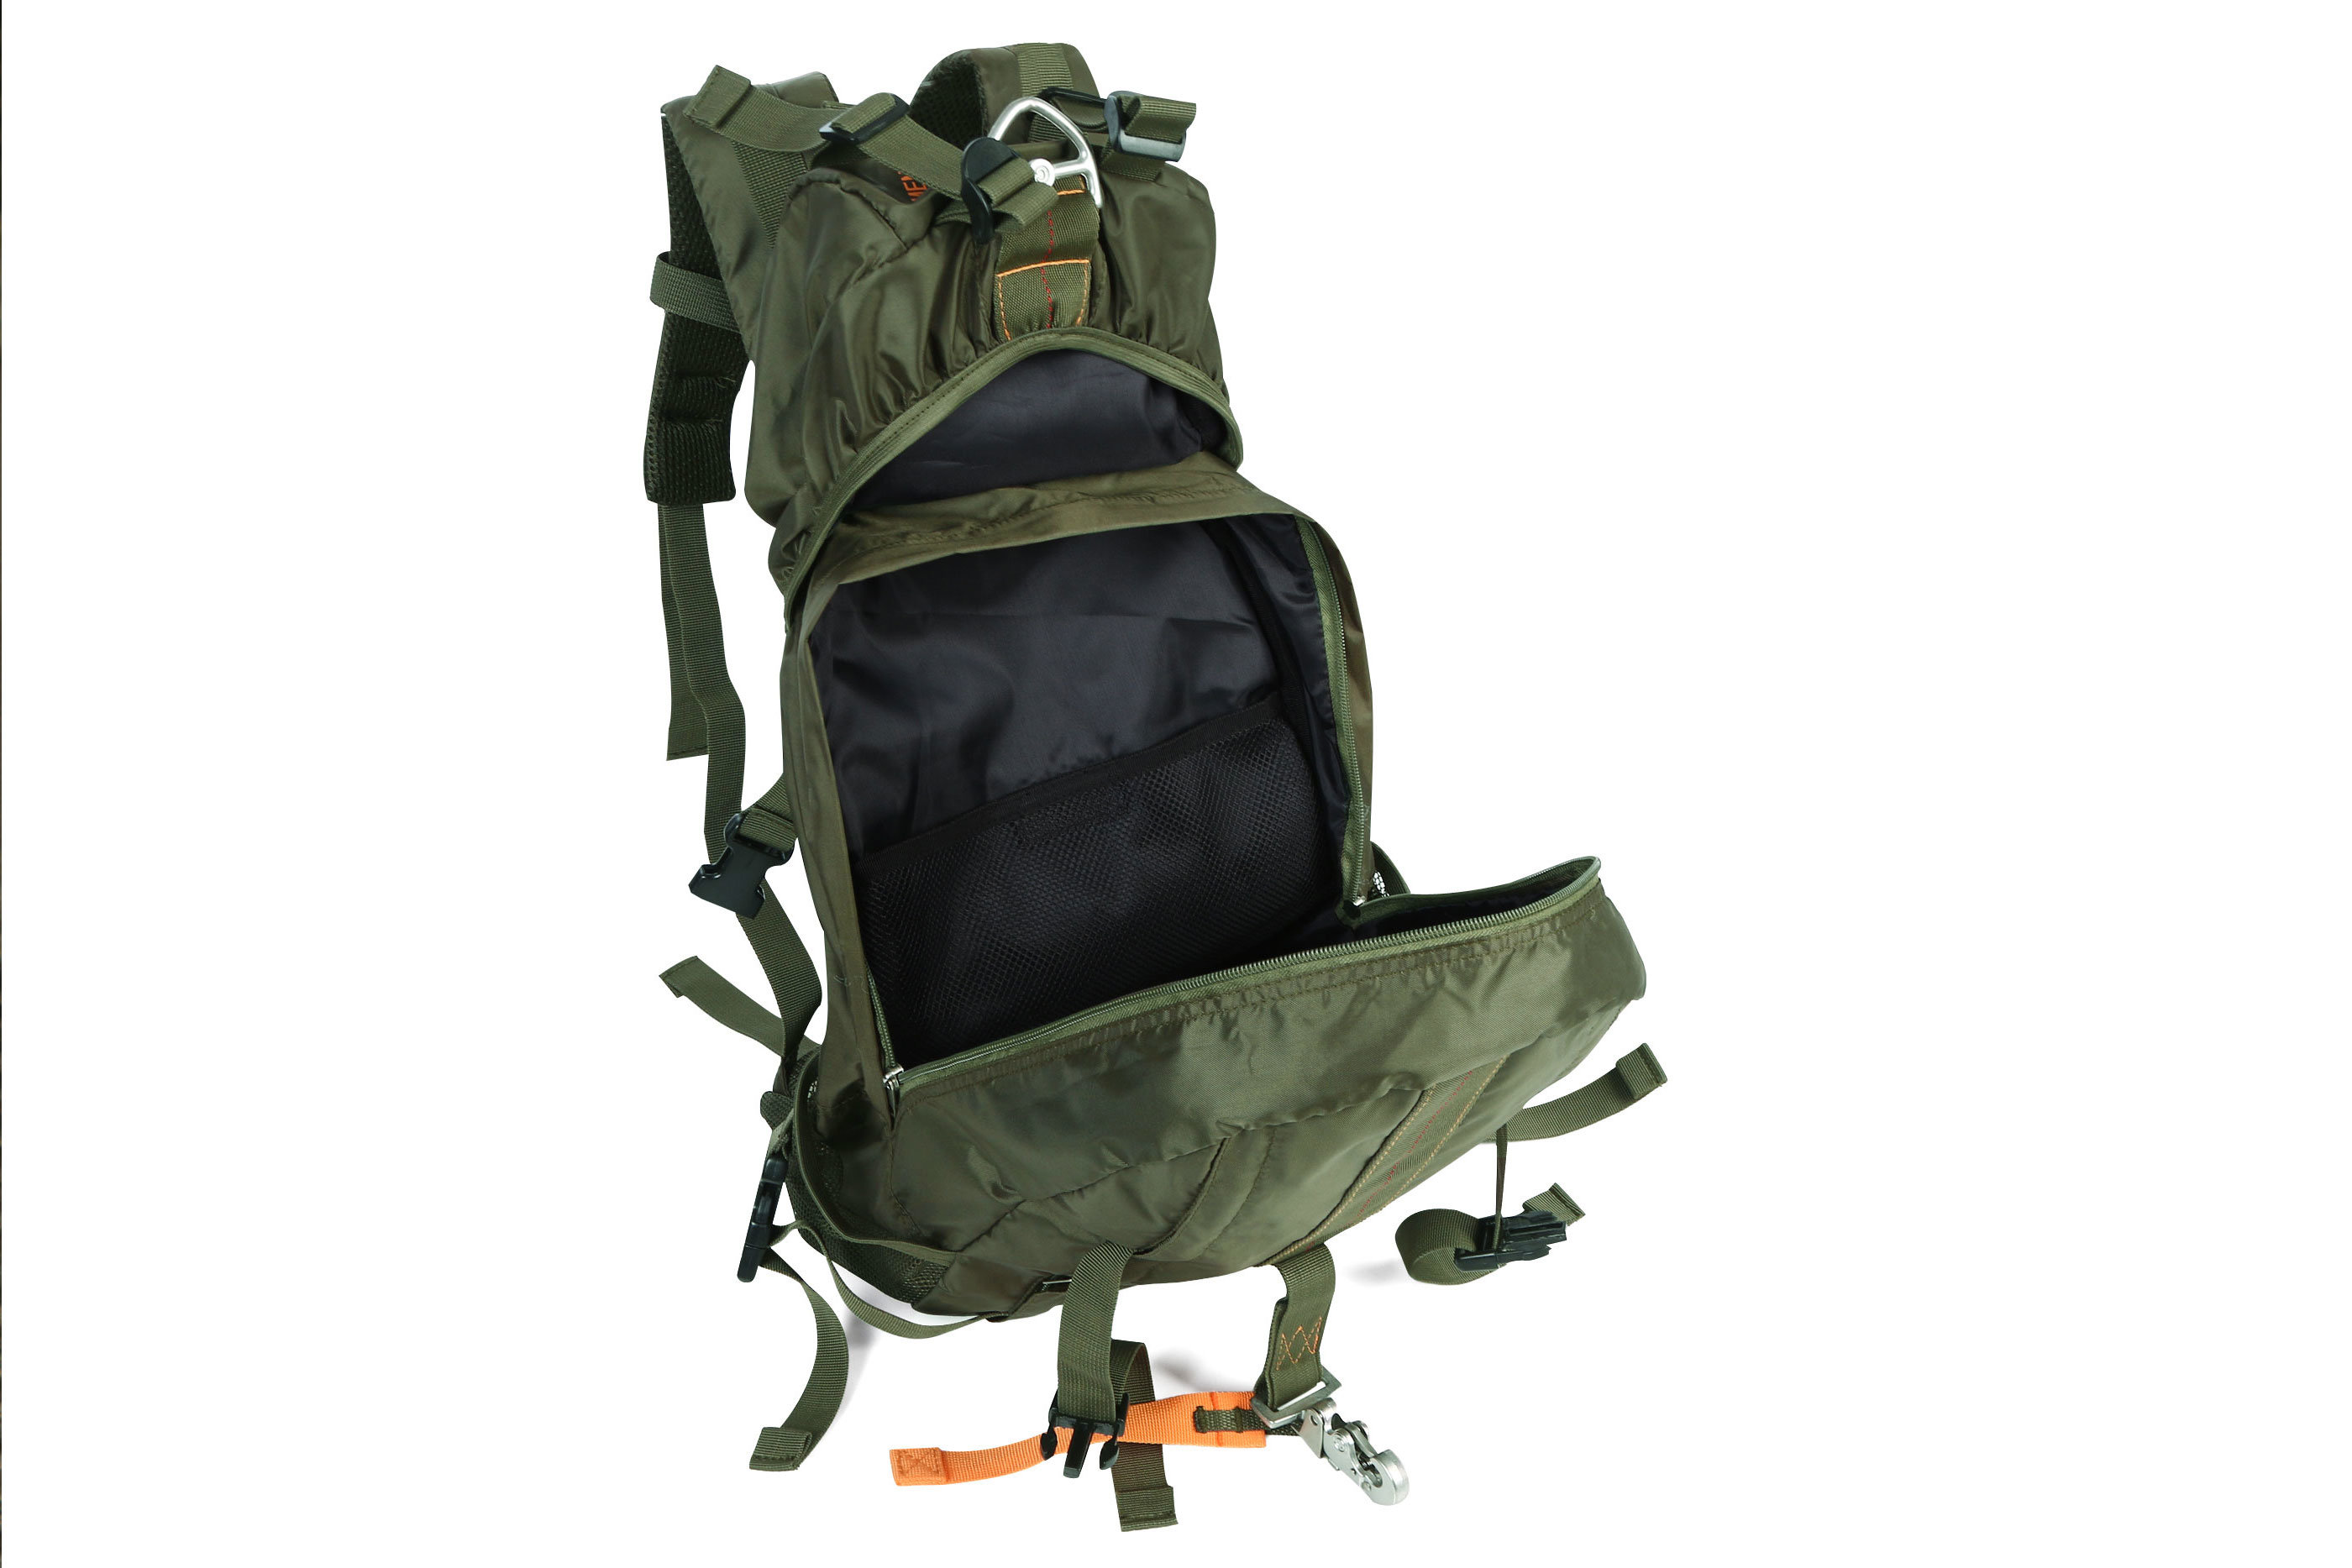 Military Tactical Parachute Backpack Army Travel Hiking Bags for Outdoor Sports